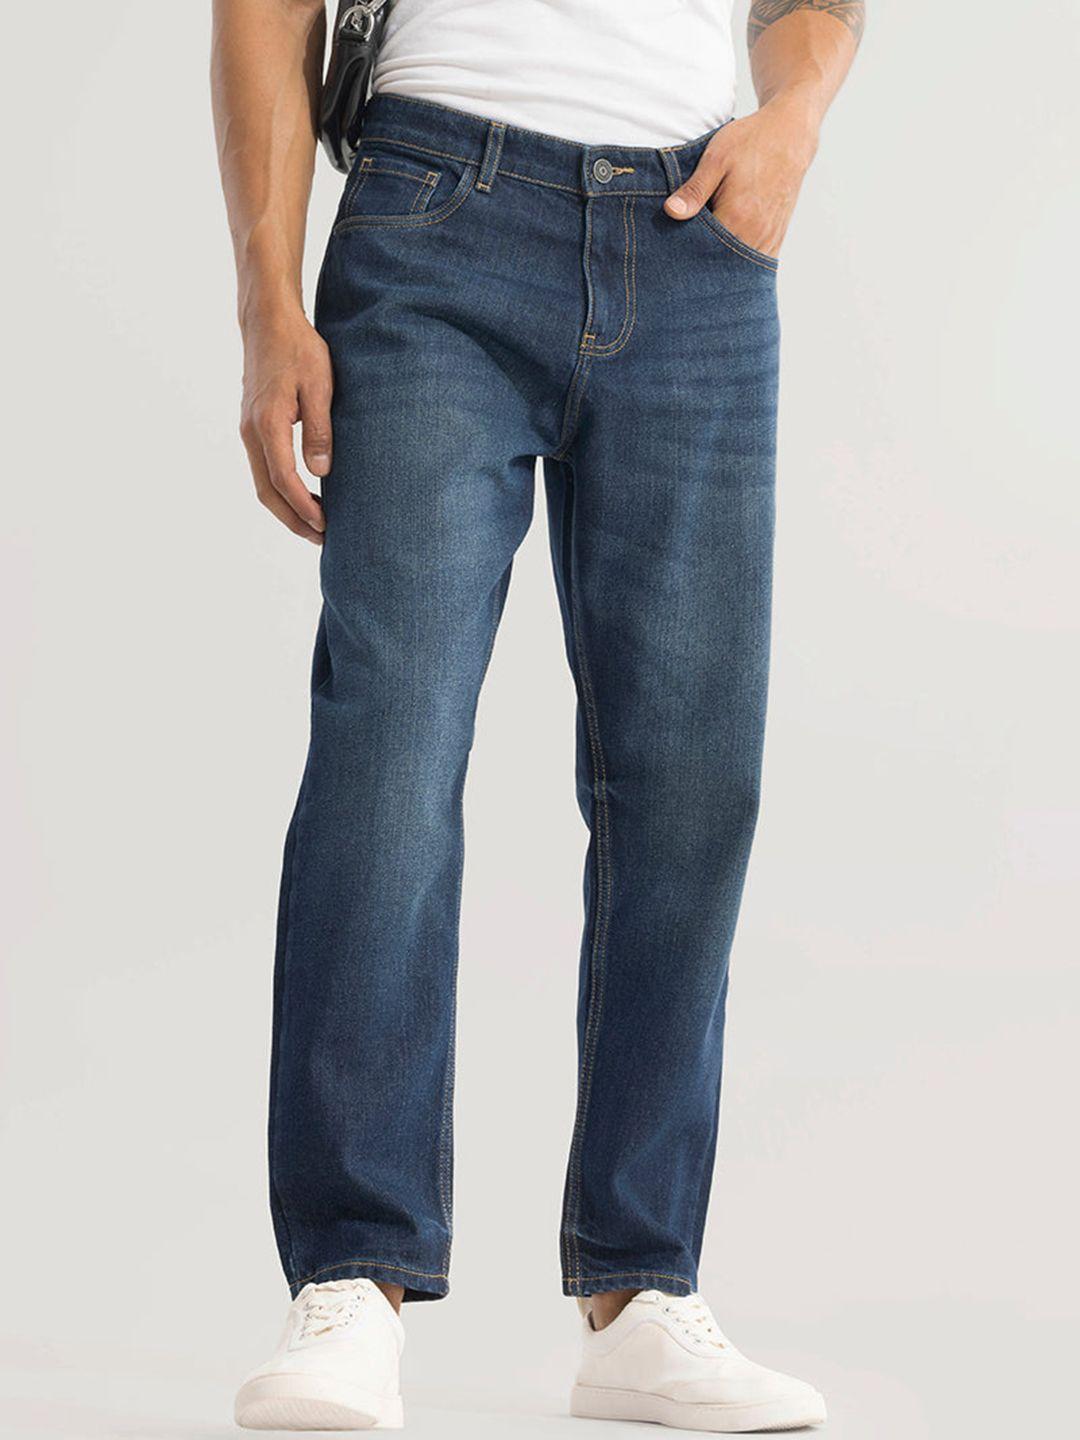 snitch-men-blue-straight-fit-light-fade-stretchable-cotton-jeans